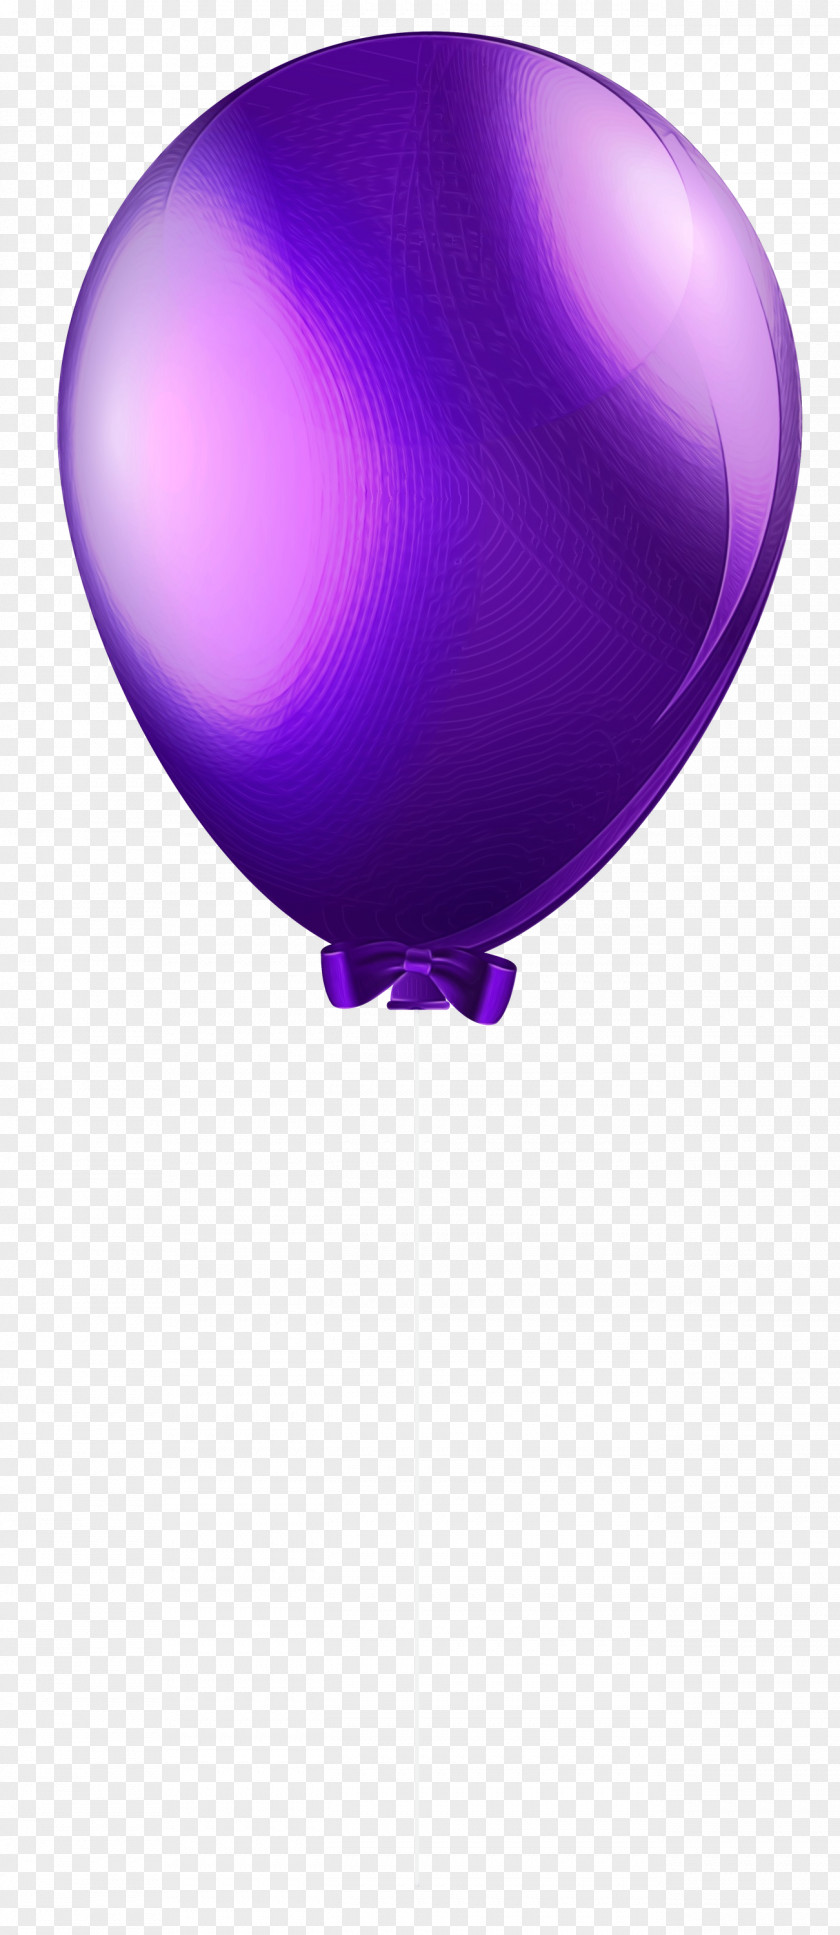 Material Property Party Supply Hot Air Balloon PNG